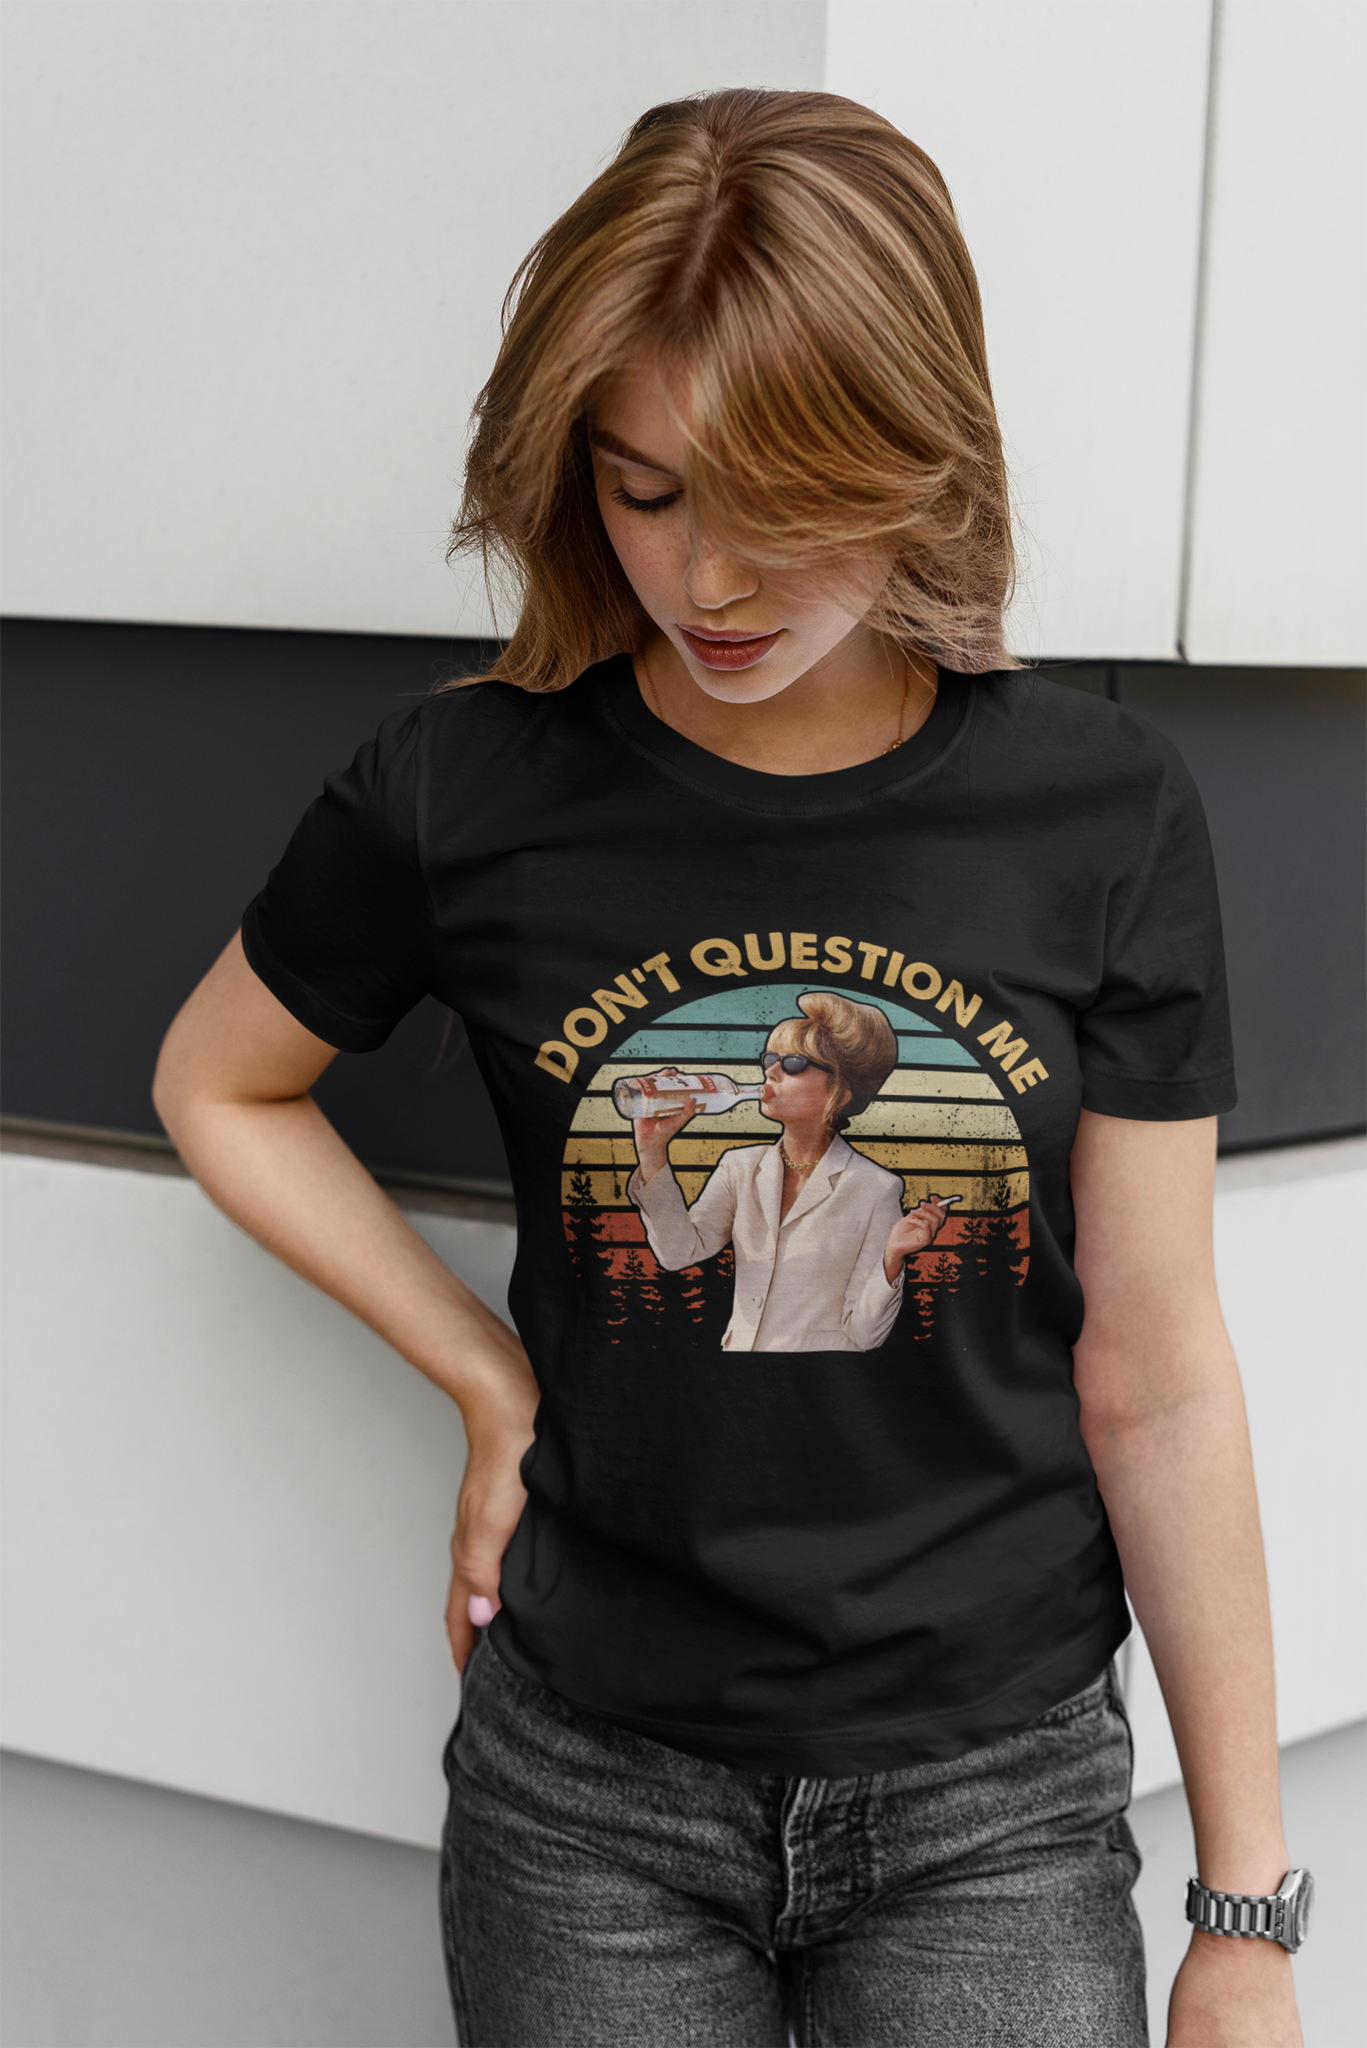 Absolutely Fabulous T Shirt, Patsy T Shirt, Dont Question Me Tshirt